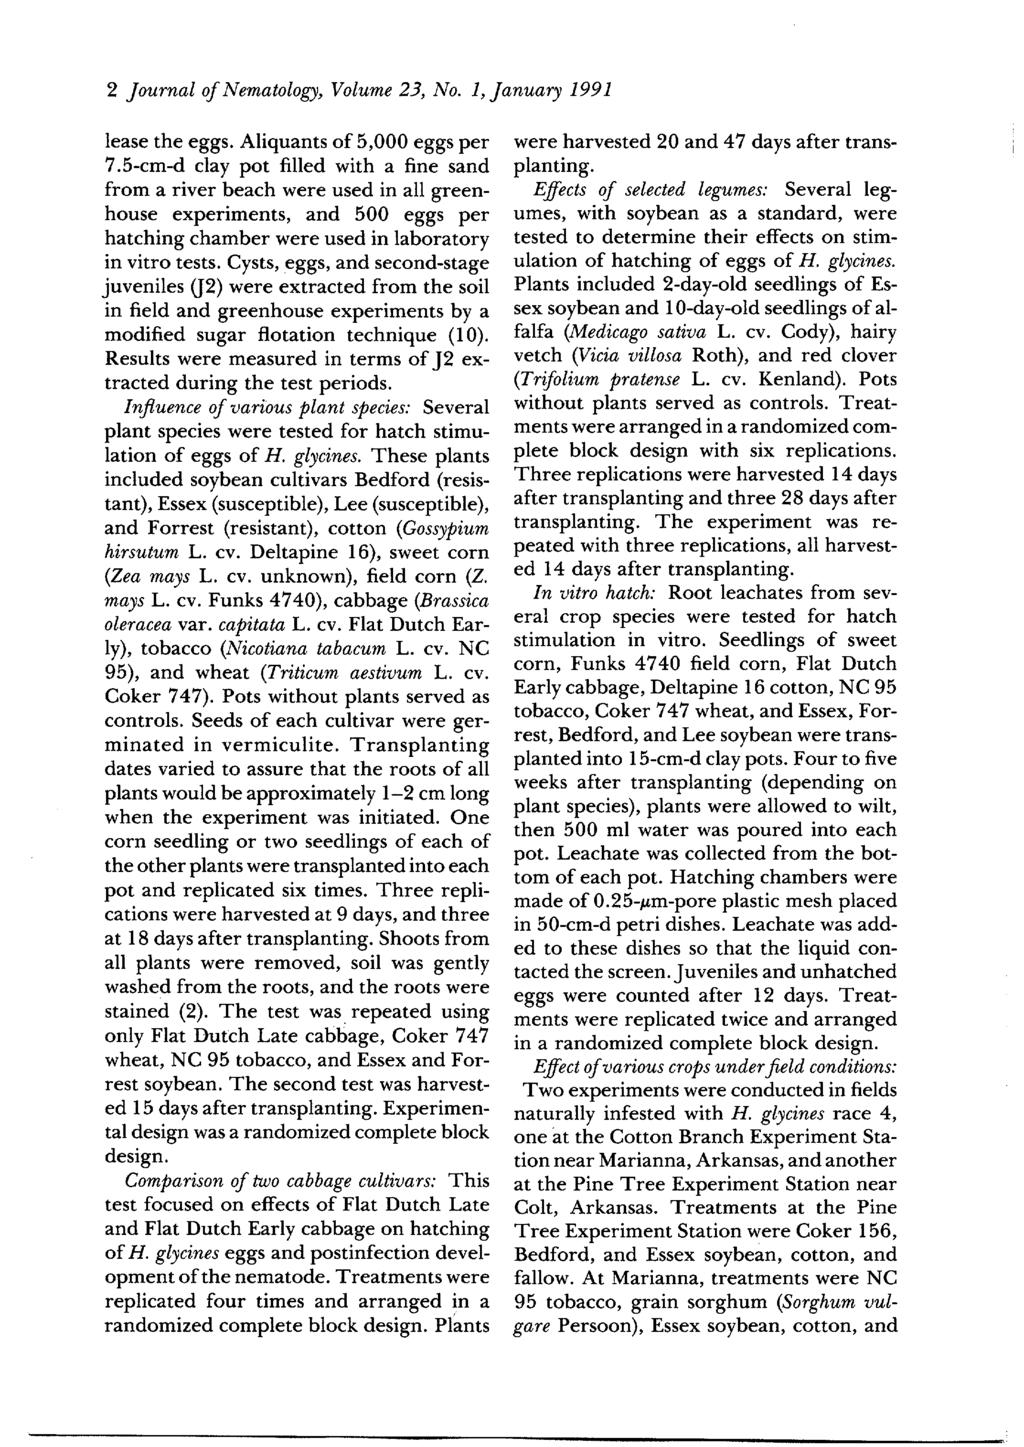 2 Journal of Nematology, Volume 23, No. 1, January 1991 lease the eggs. Aliquants of 5,000 eggs per 7.